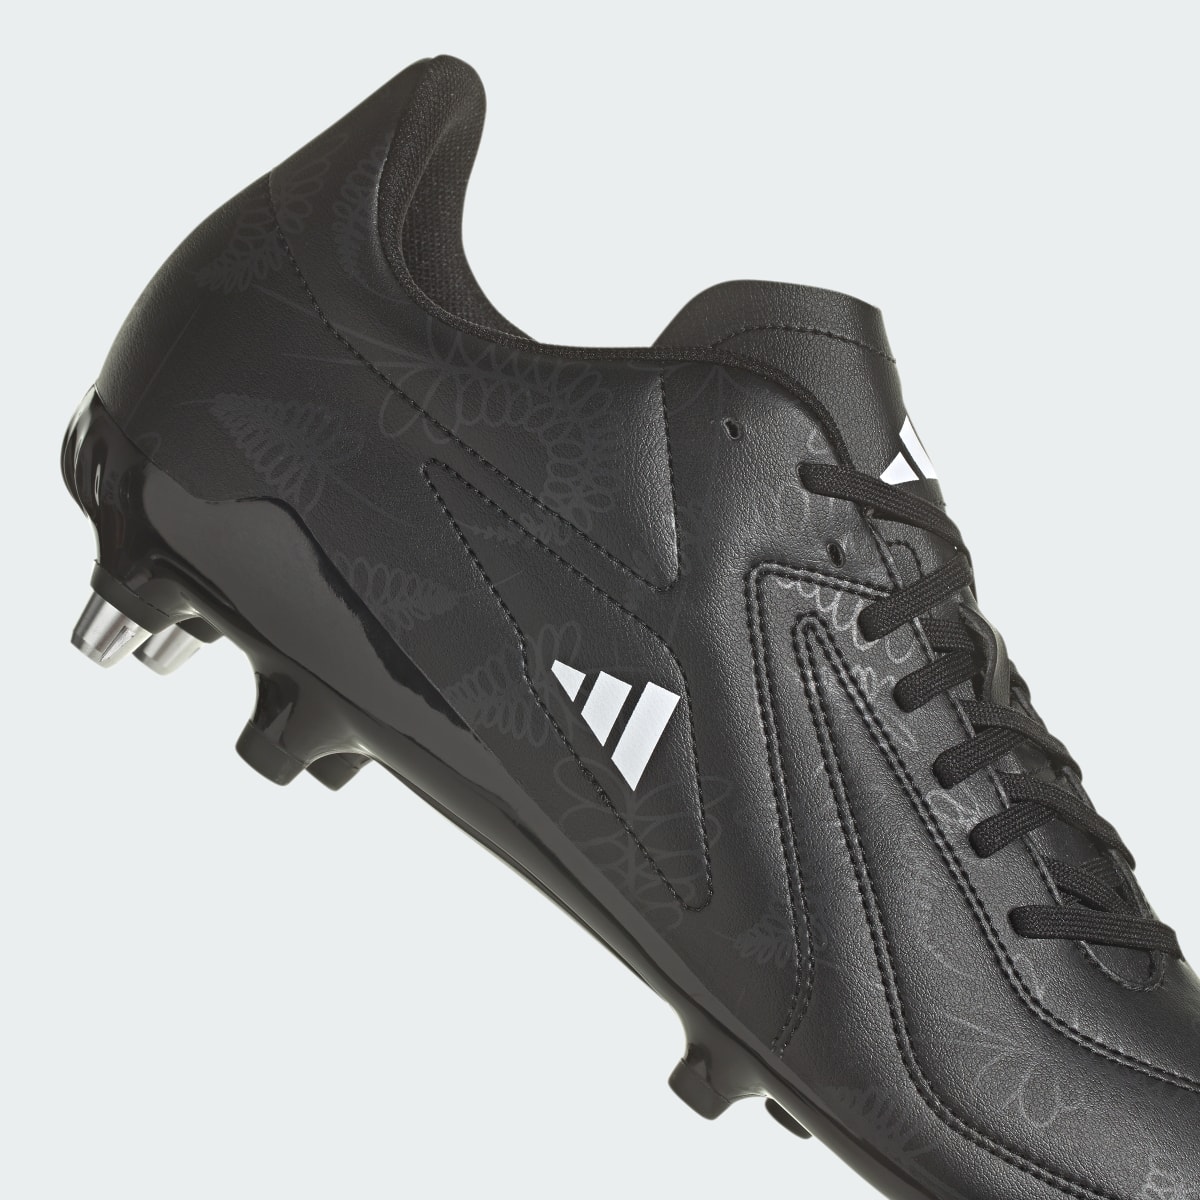 Adidas RS15 Soft Ground Rugby Boots. 9